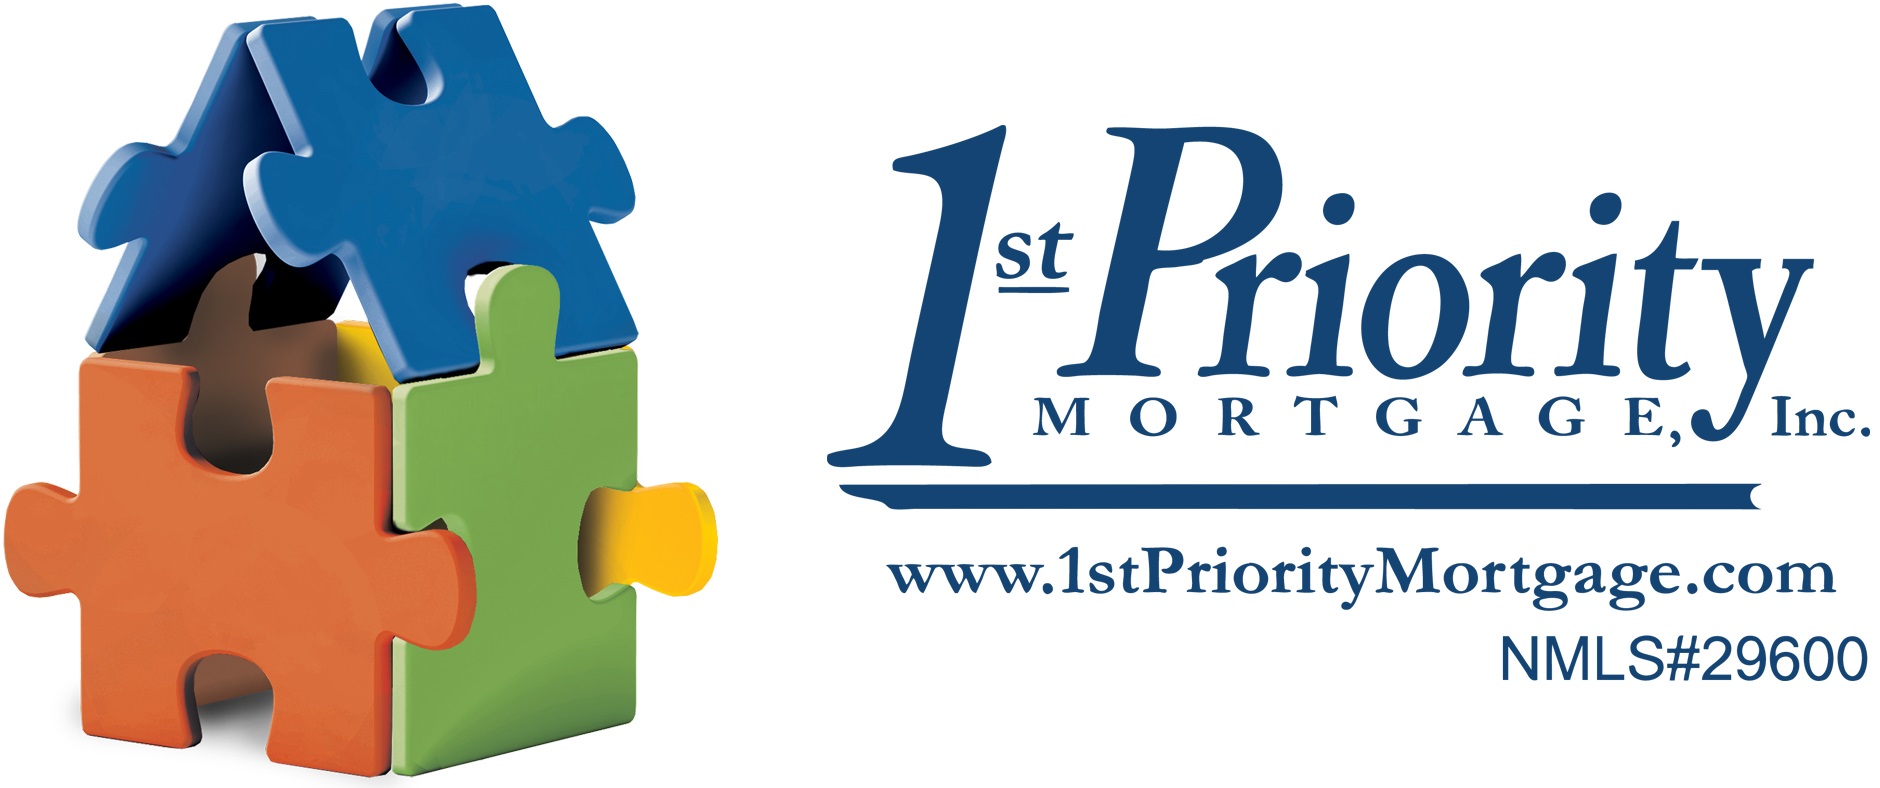 Fixed Rate Mortgage - 1st Priority Mortgage, Inc.